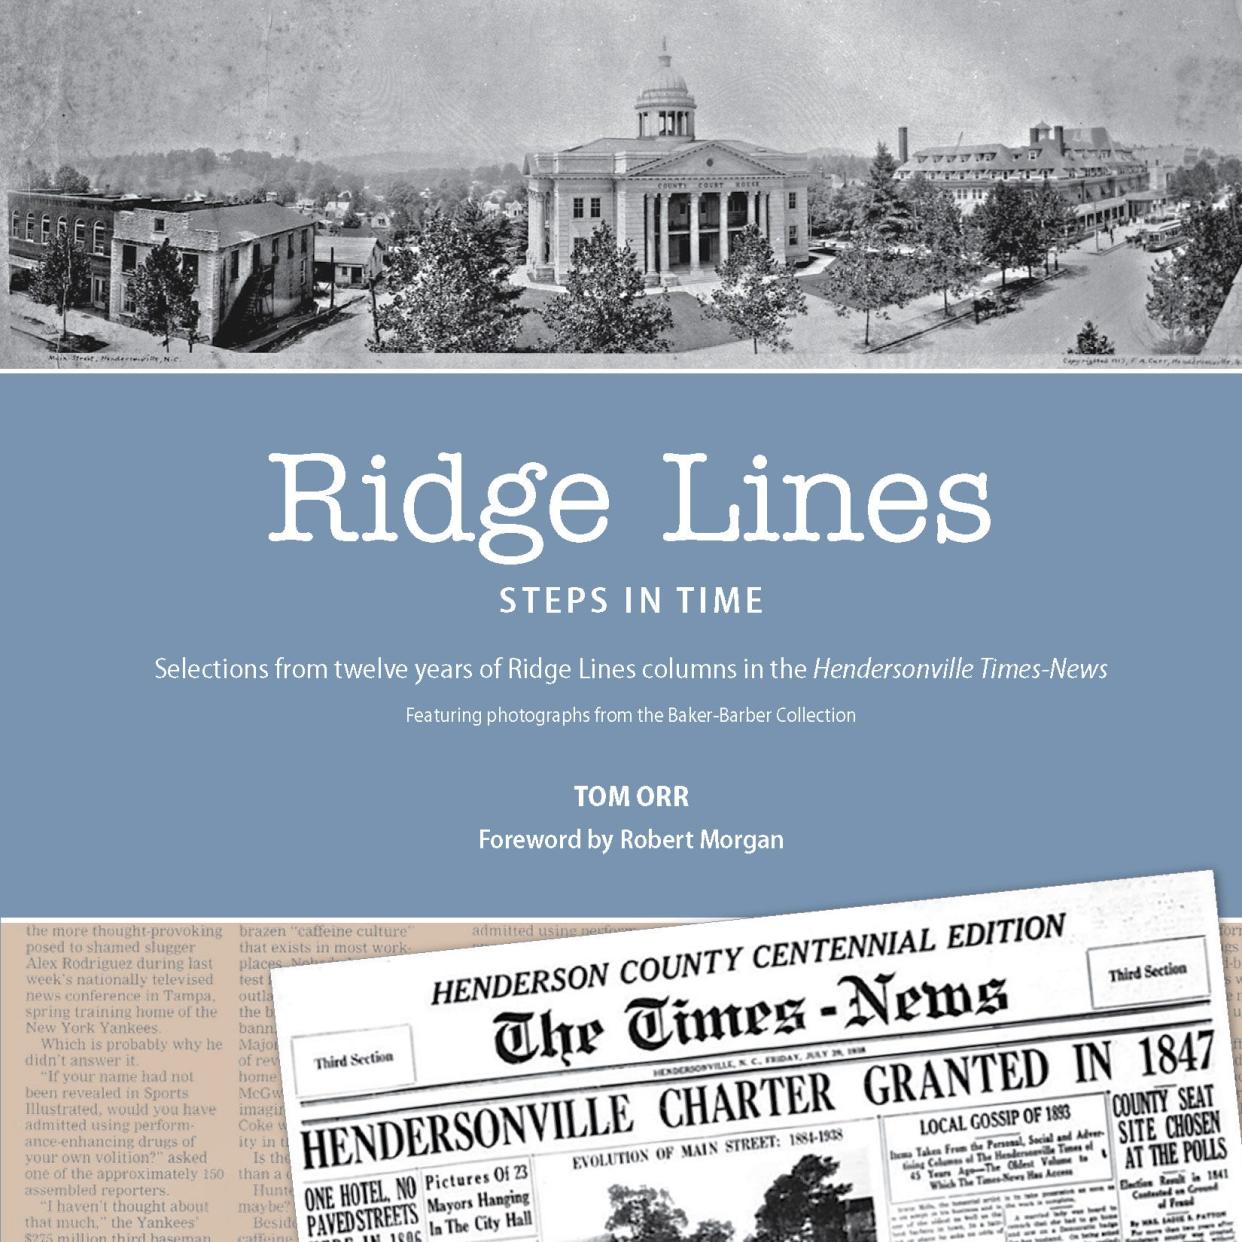 A book of Tom Orr's selected Ridge Lines columns is set to be released in August following a fundraising campaign to cover publication costs. Ridge Lines: Steps in Time will include photos from the historic Baker-Barber Collection and sales will benefit the Community Foundation of Henderson County.